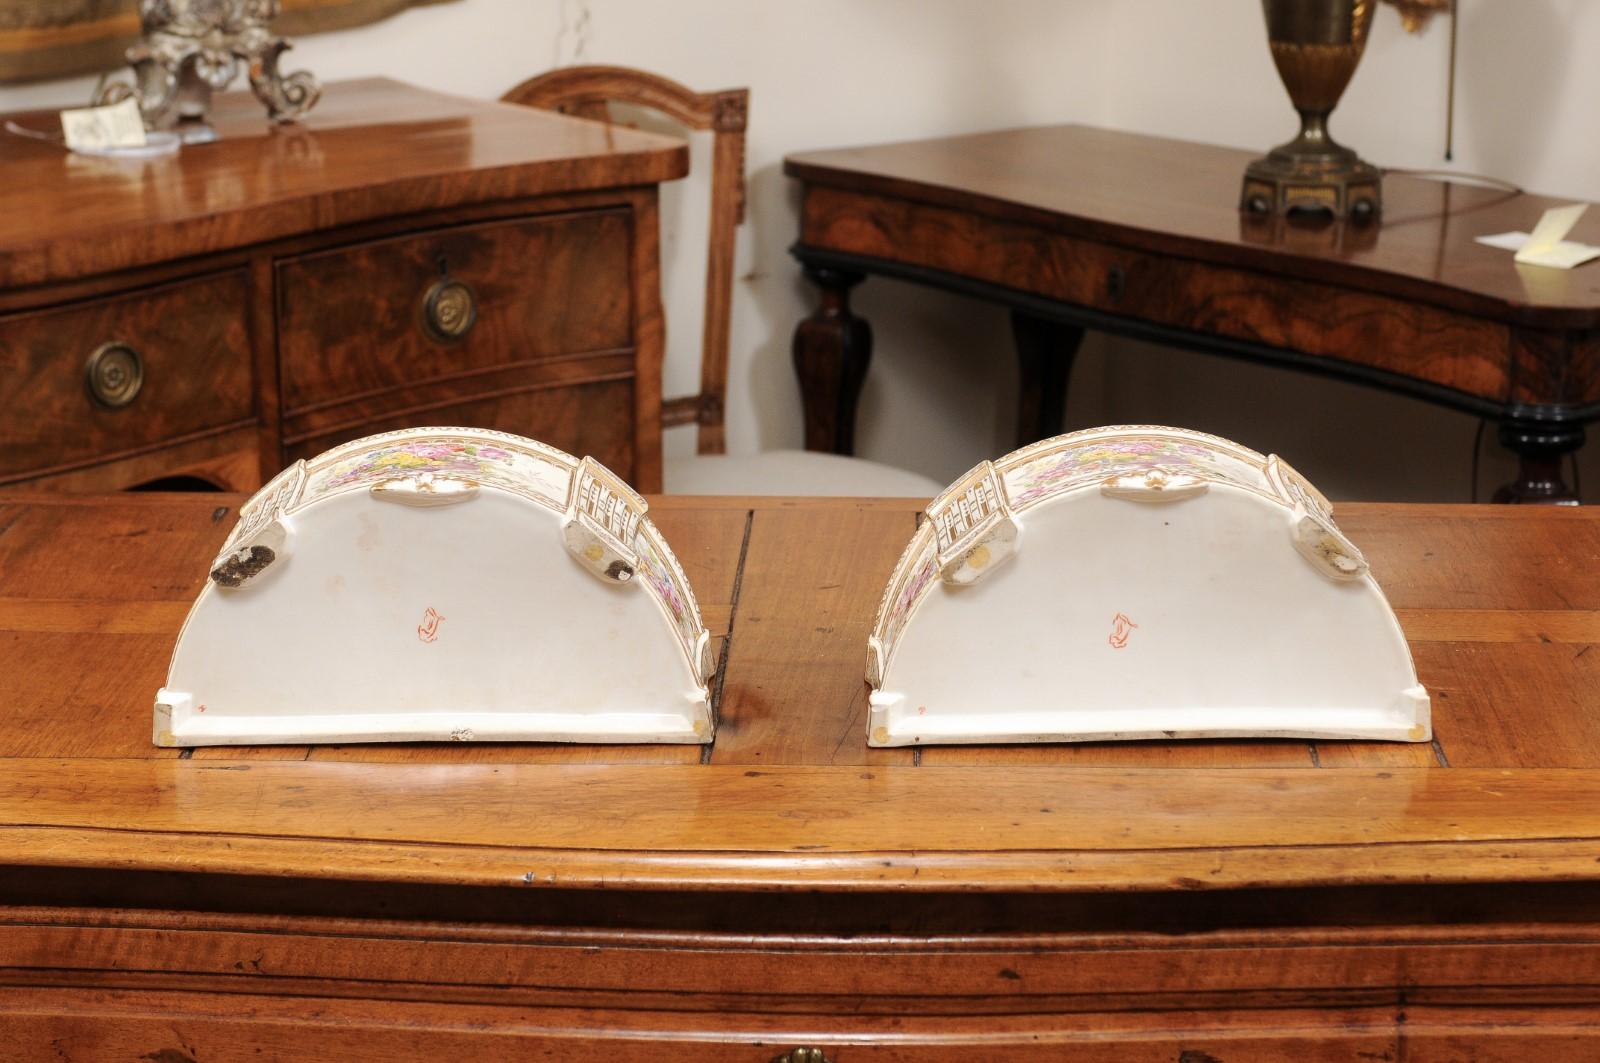 Pair of 19th Century French Porcelain Bough Pots with Gilt & Floral Accents For Sale 5